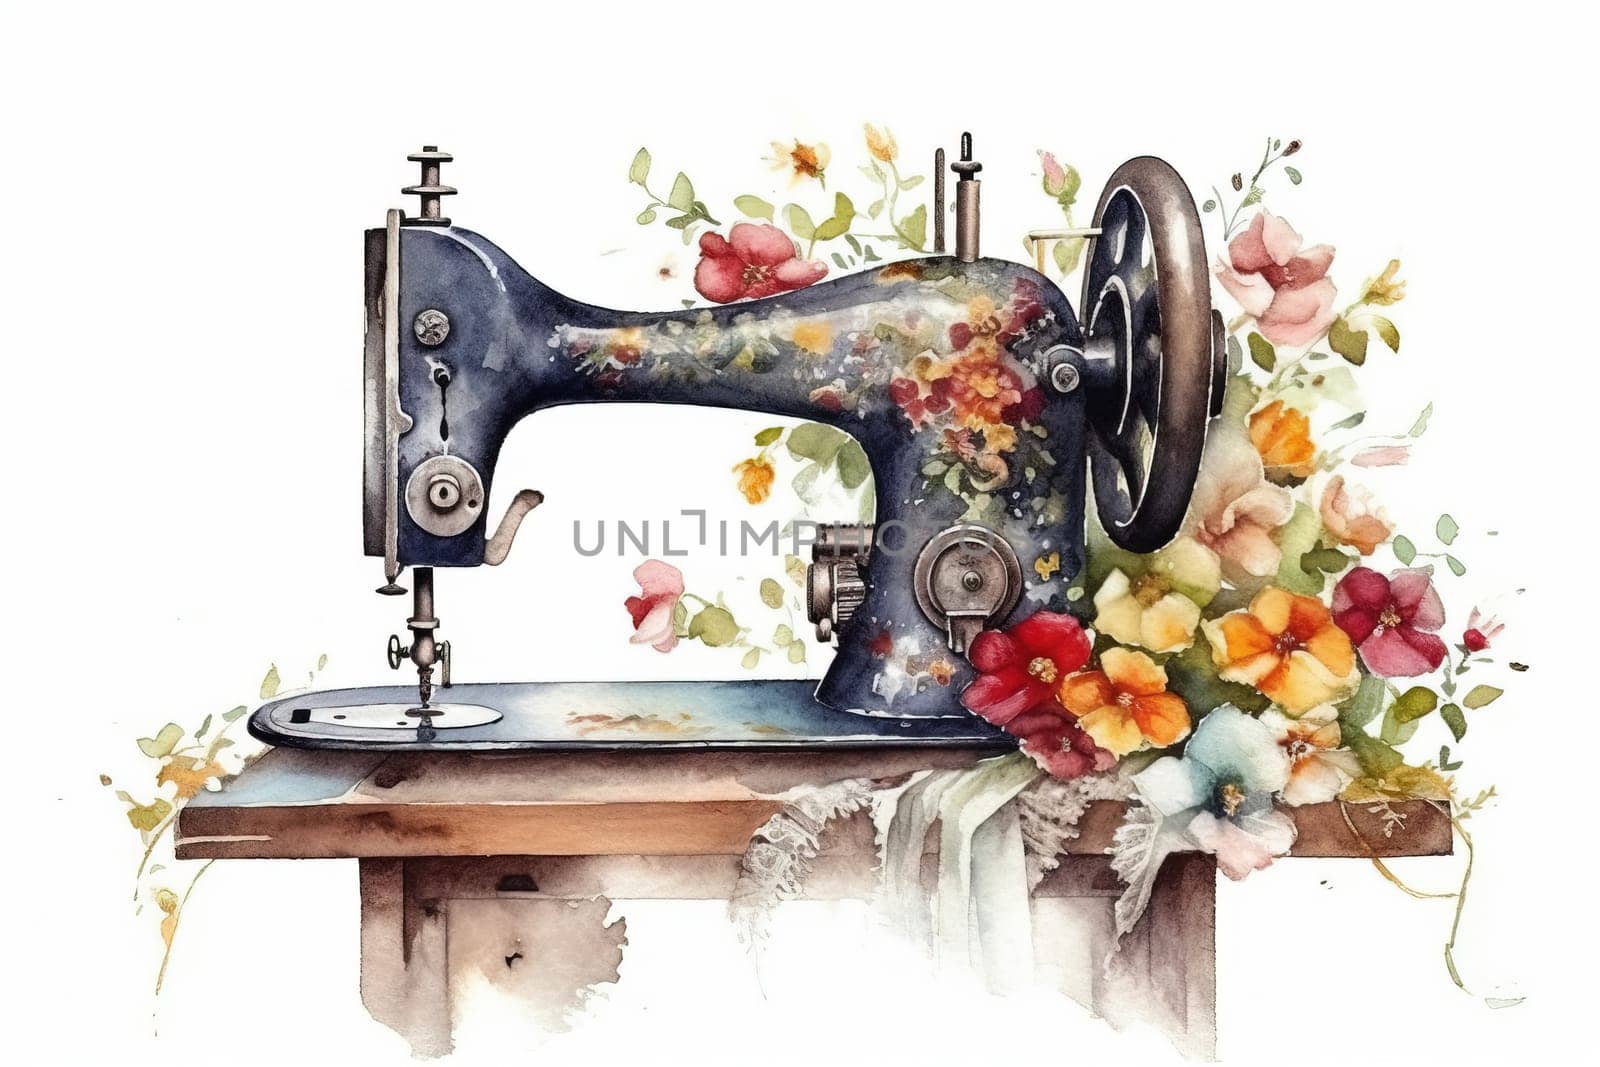 Watercolor Illustration Of Sewing Machine With Colorful Flowers On A White Background by GekaSkr